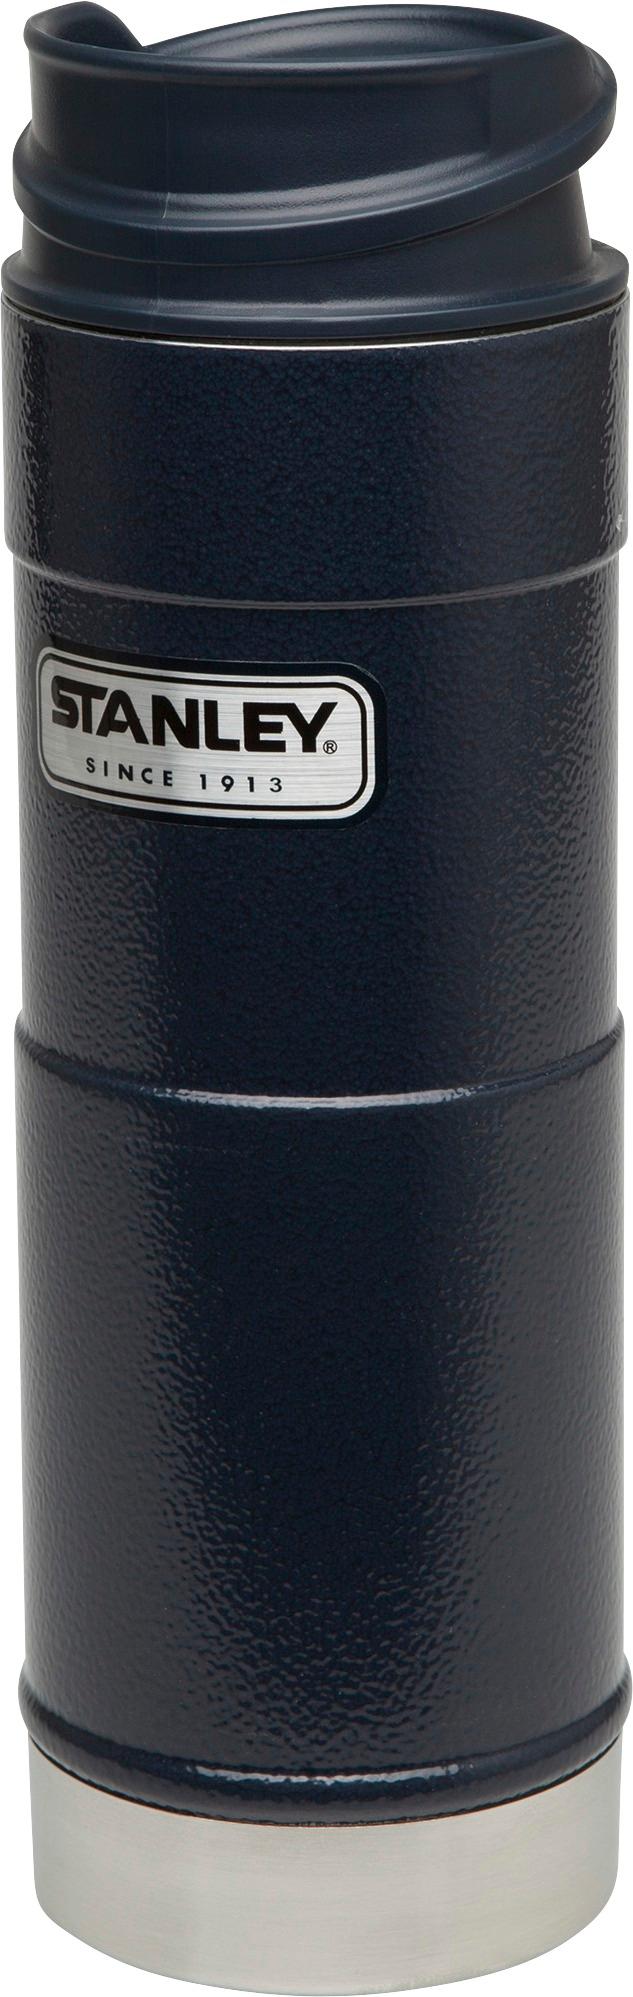 Best Buy: Stanley Classic 20.8-Oz. Thermal Cup Hammertone green 10